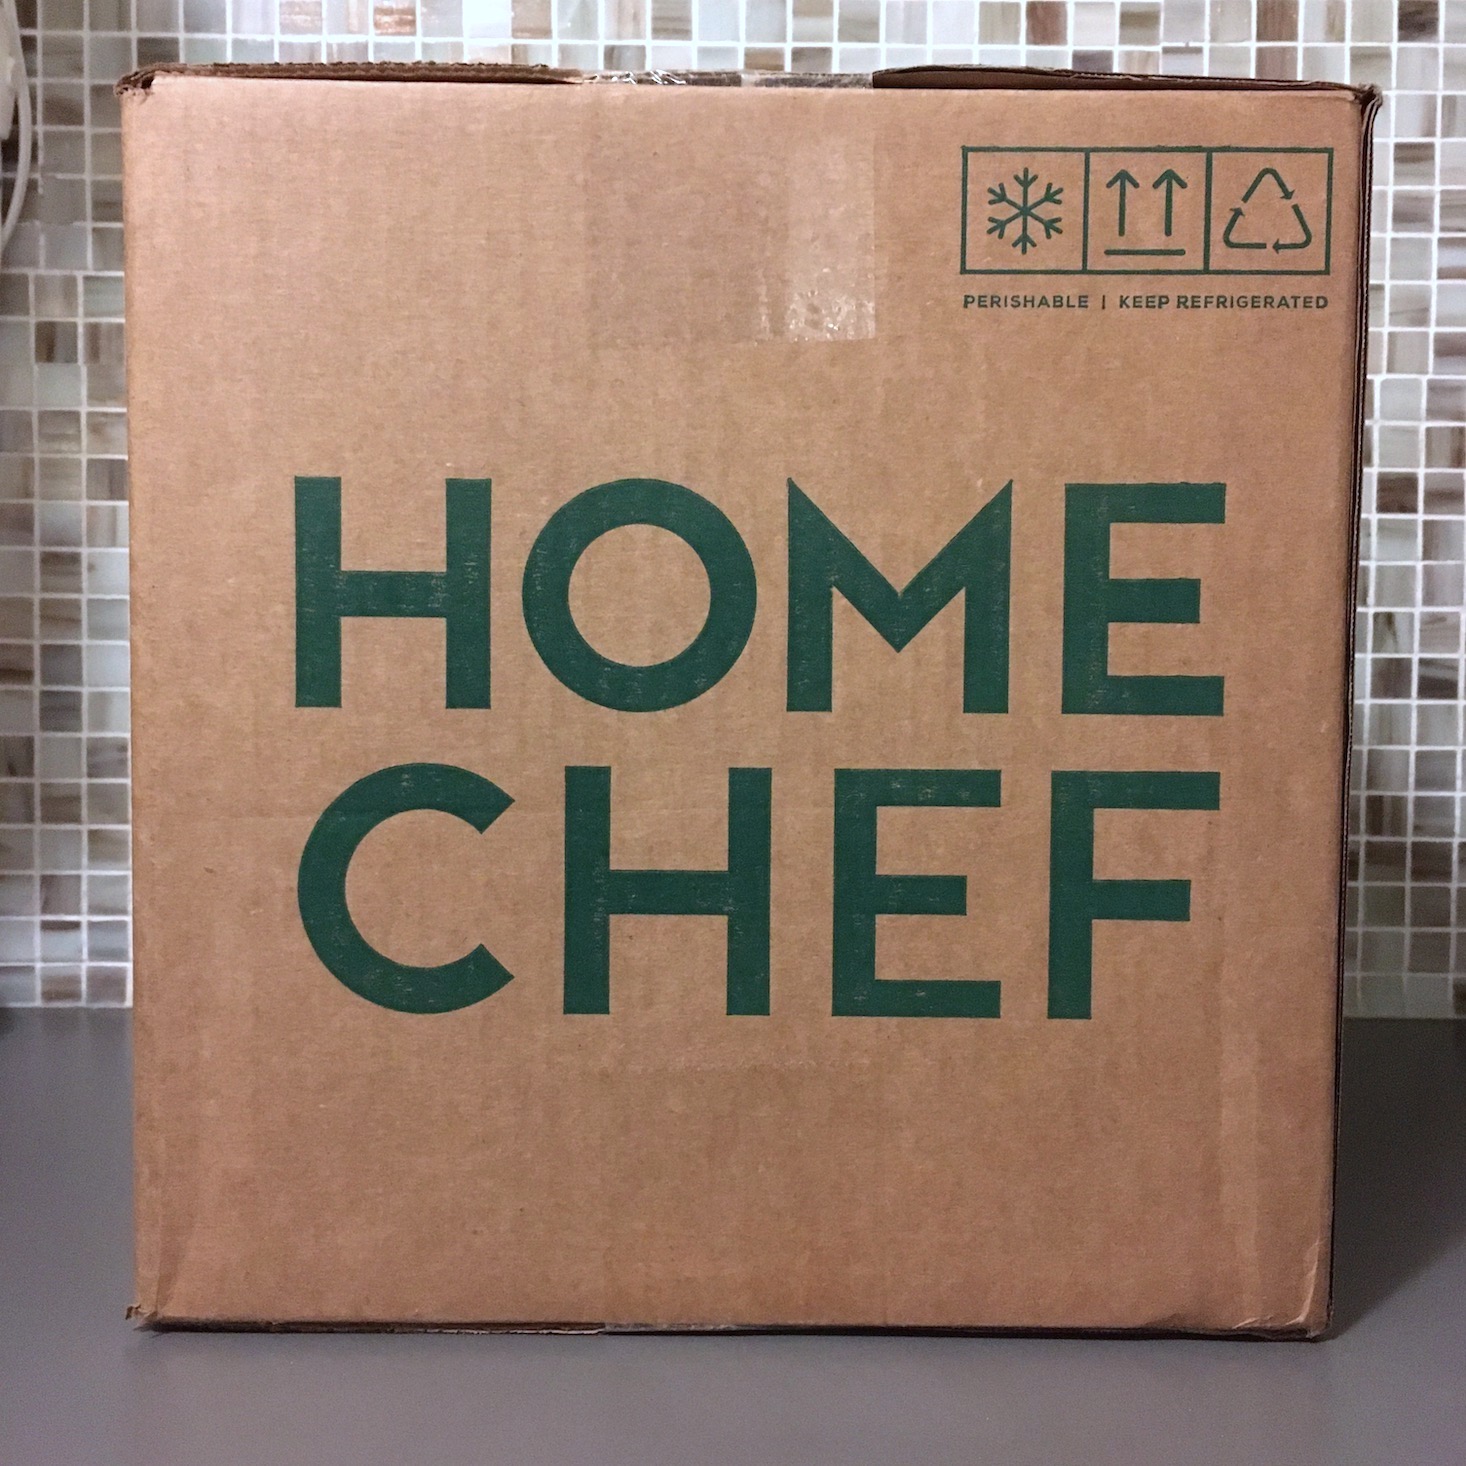 Home Chef Meal Kit Review + Coupon – November 2019